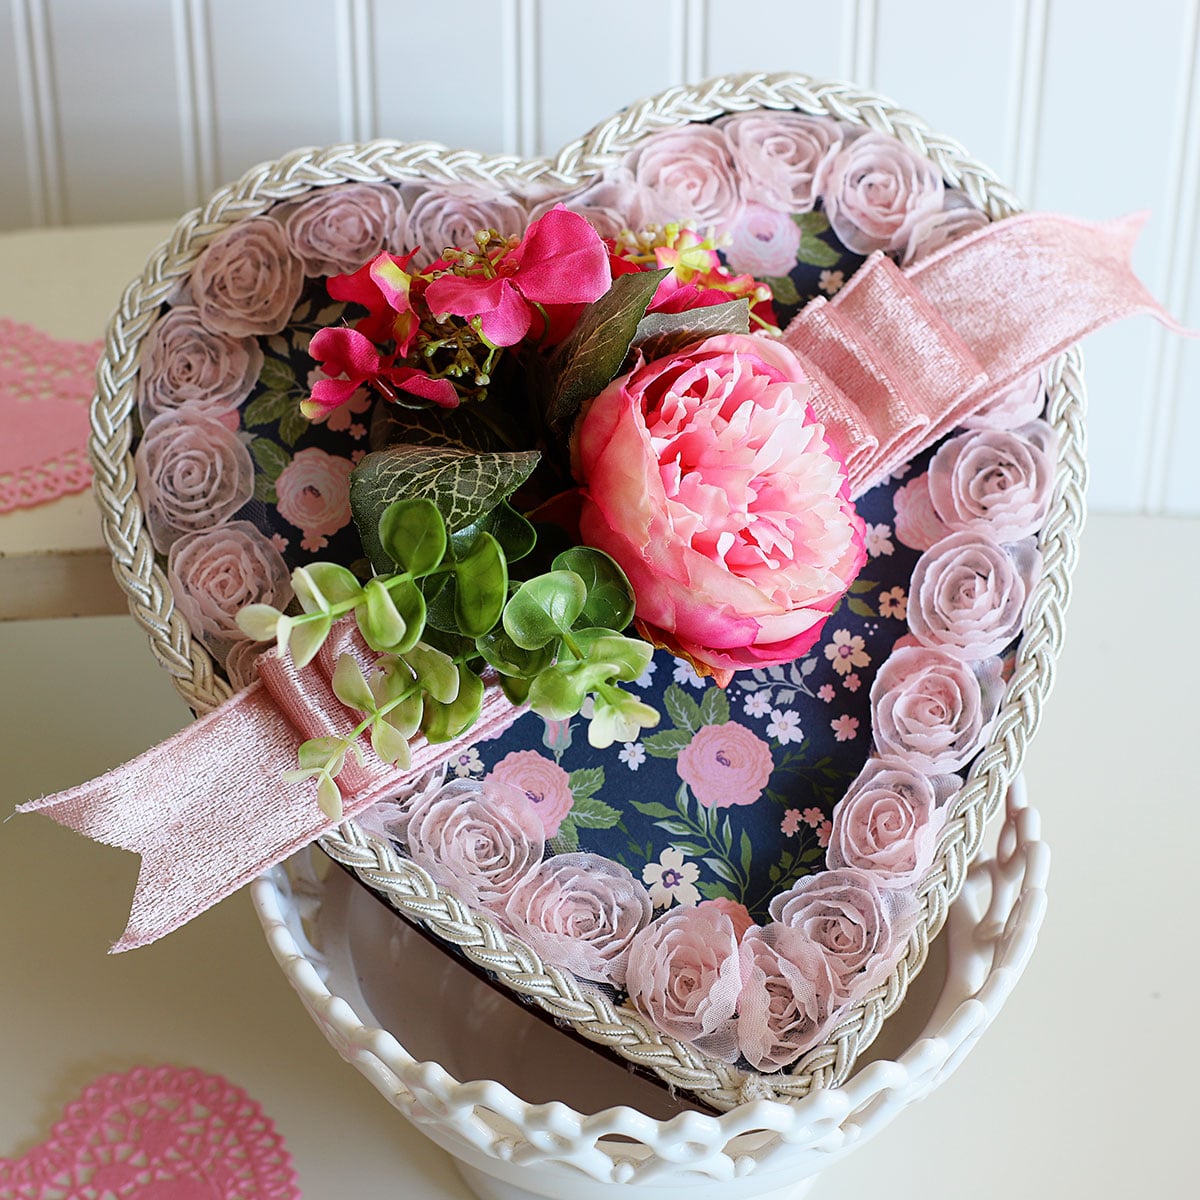 How to DIY a vintage styled Valentine's Day candy box.